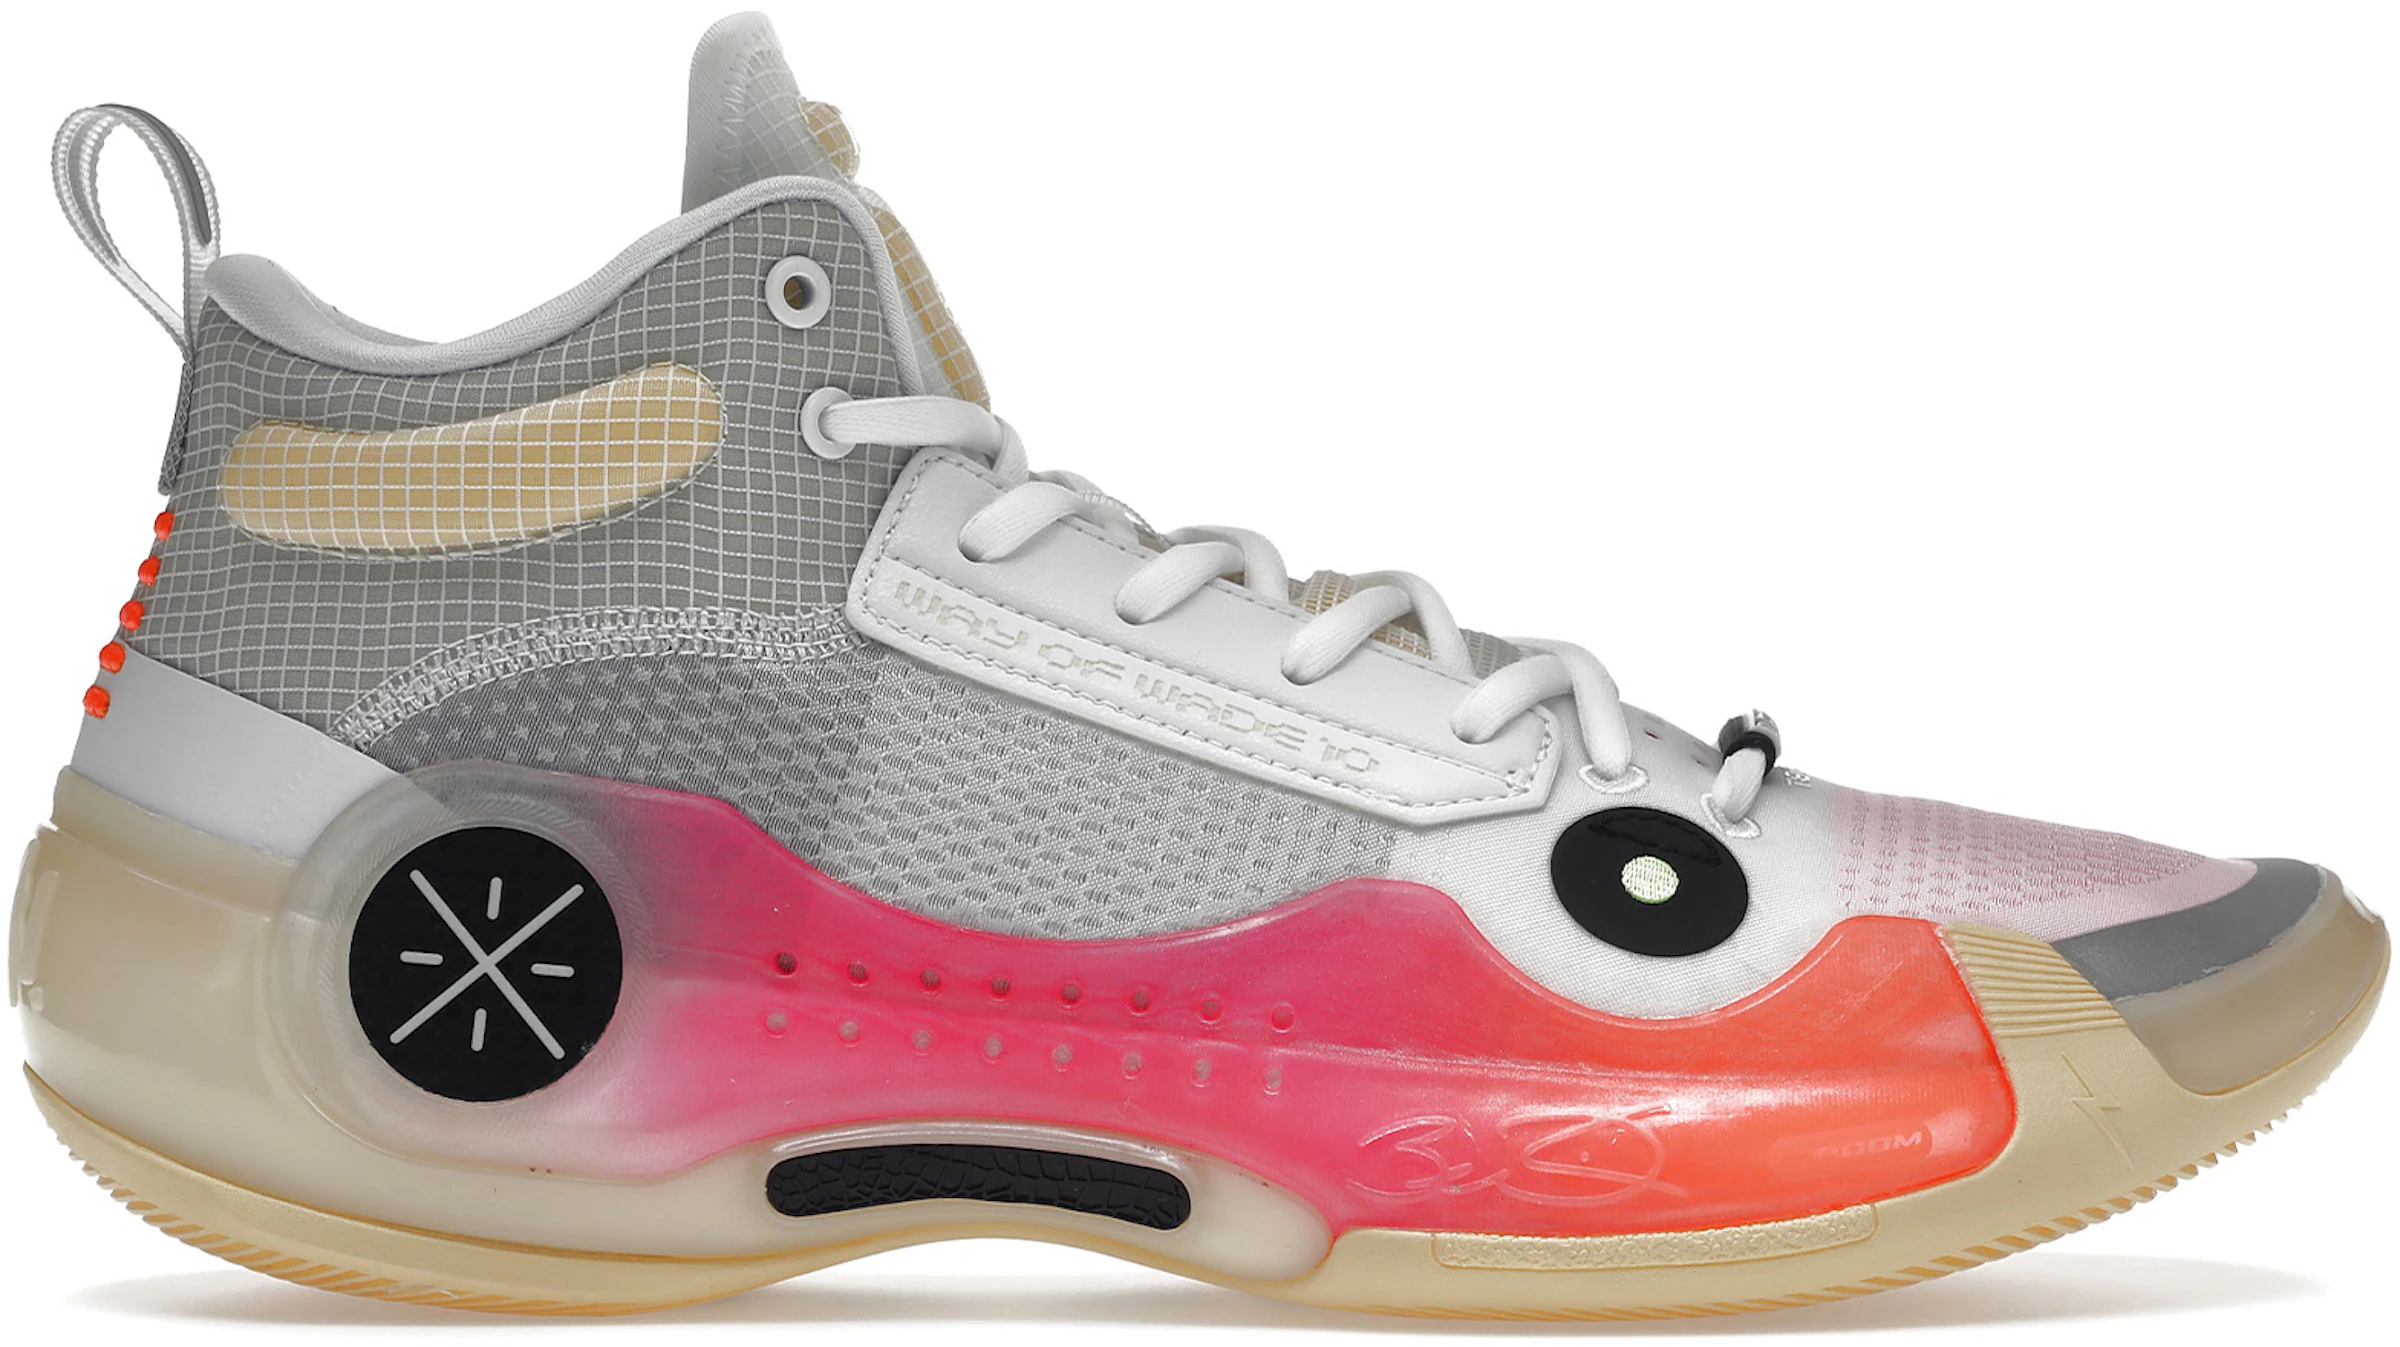 Li-Ning Way Of Wade 10 Review, Deals, Pics Of Colorways | lupon.gov.ph